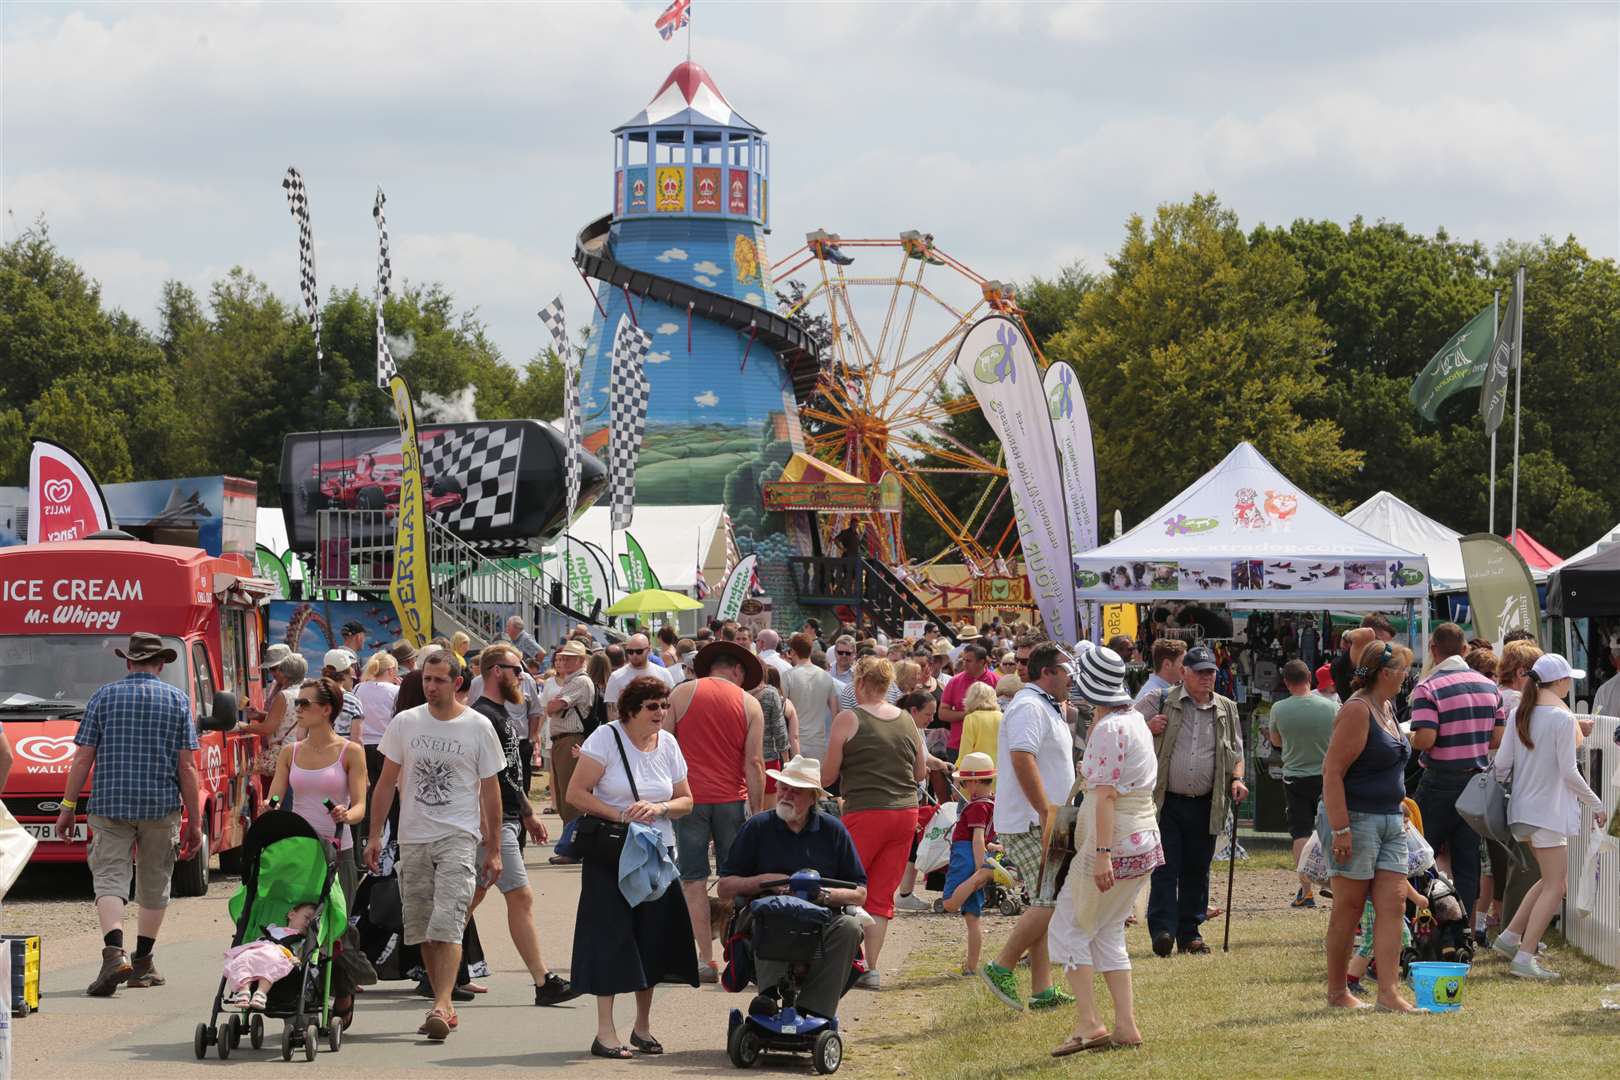 The fairground at the county show